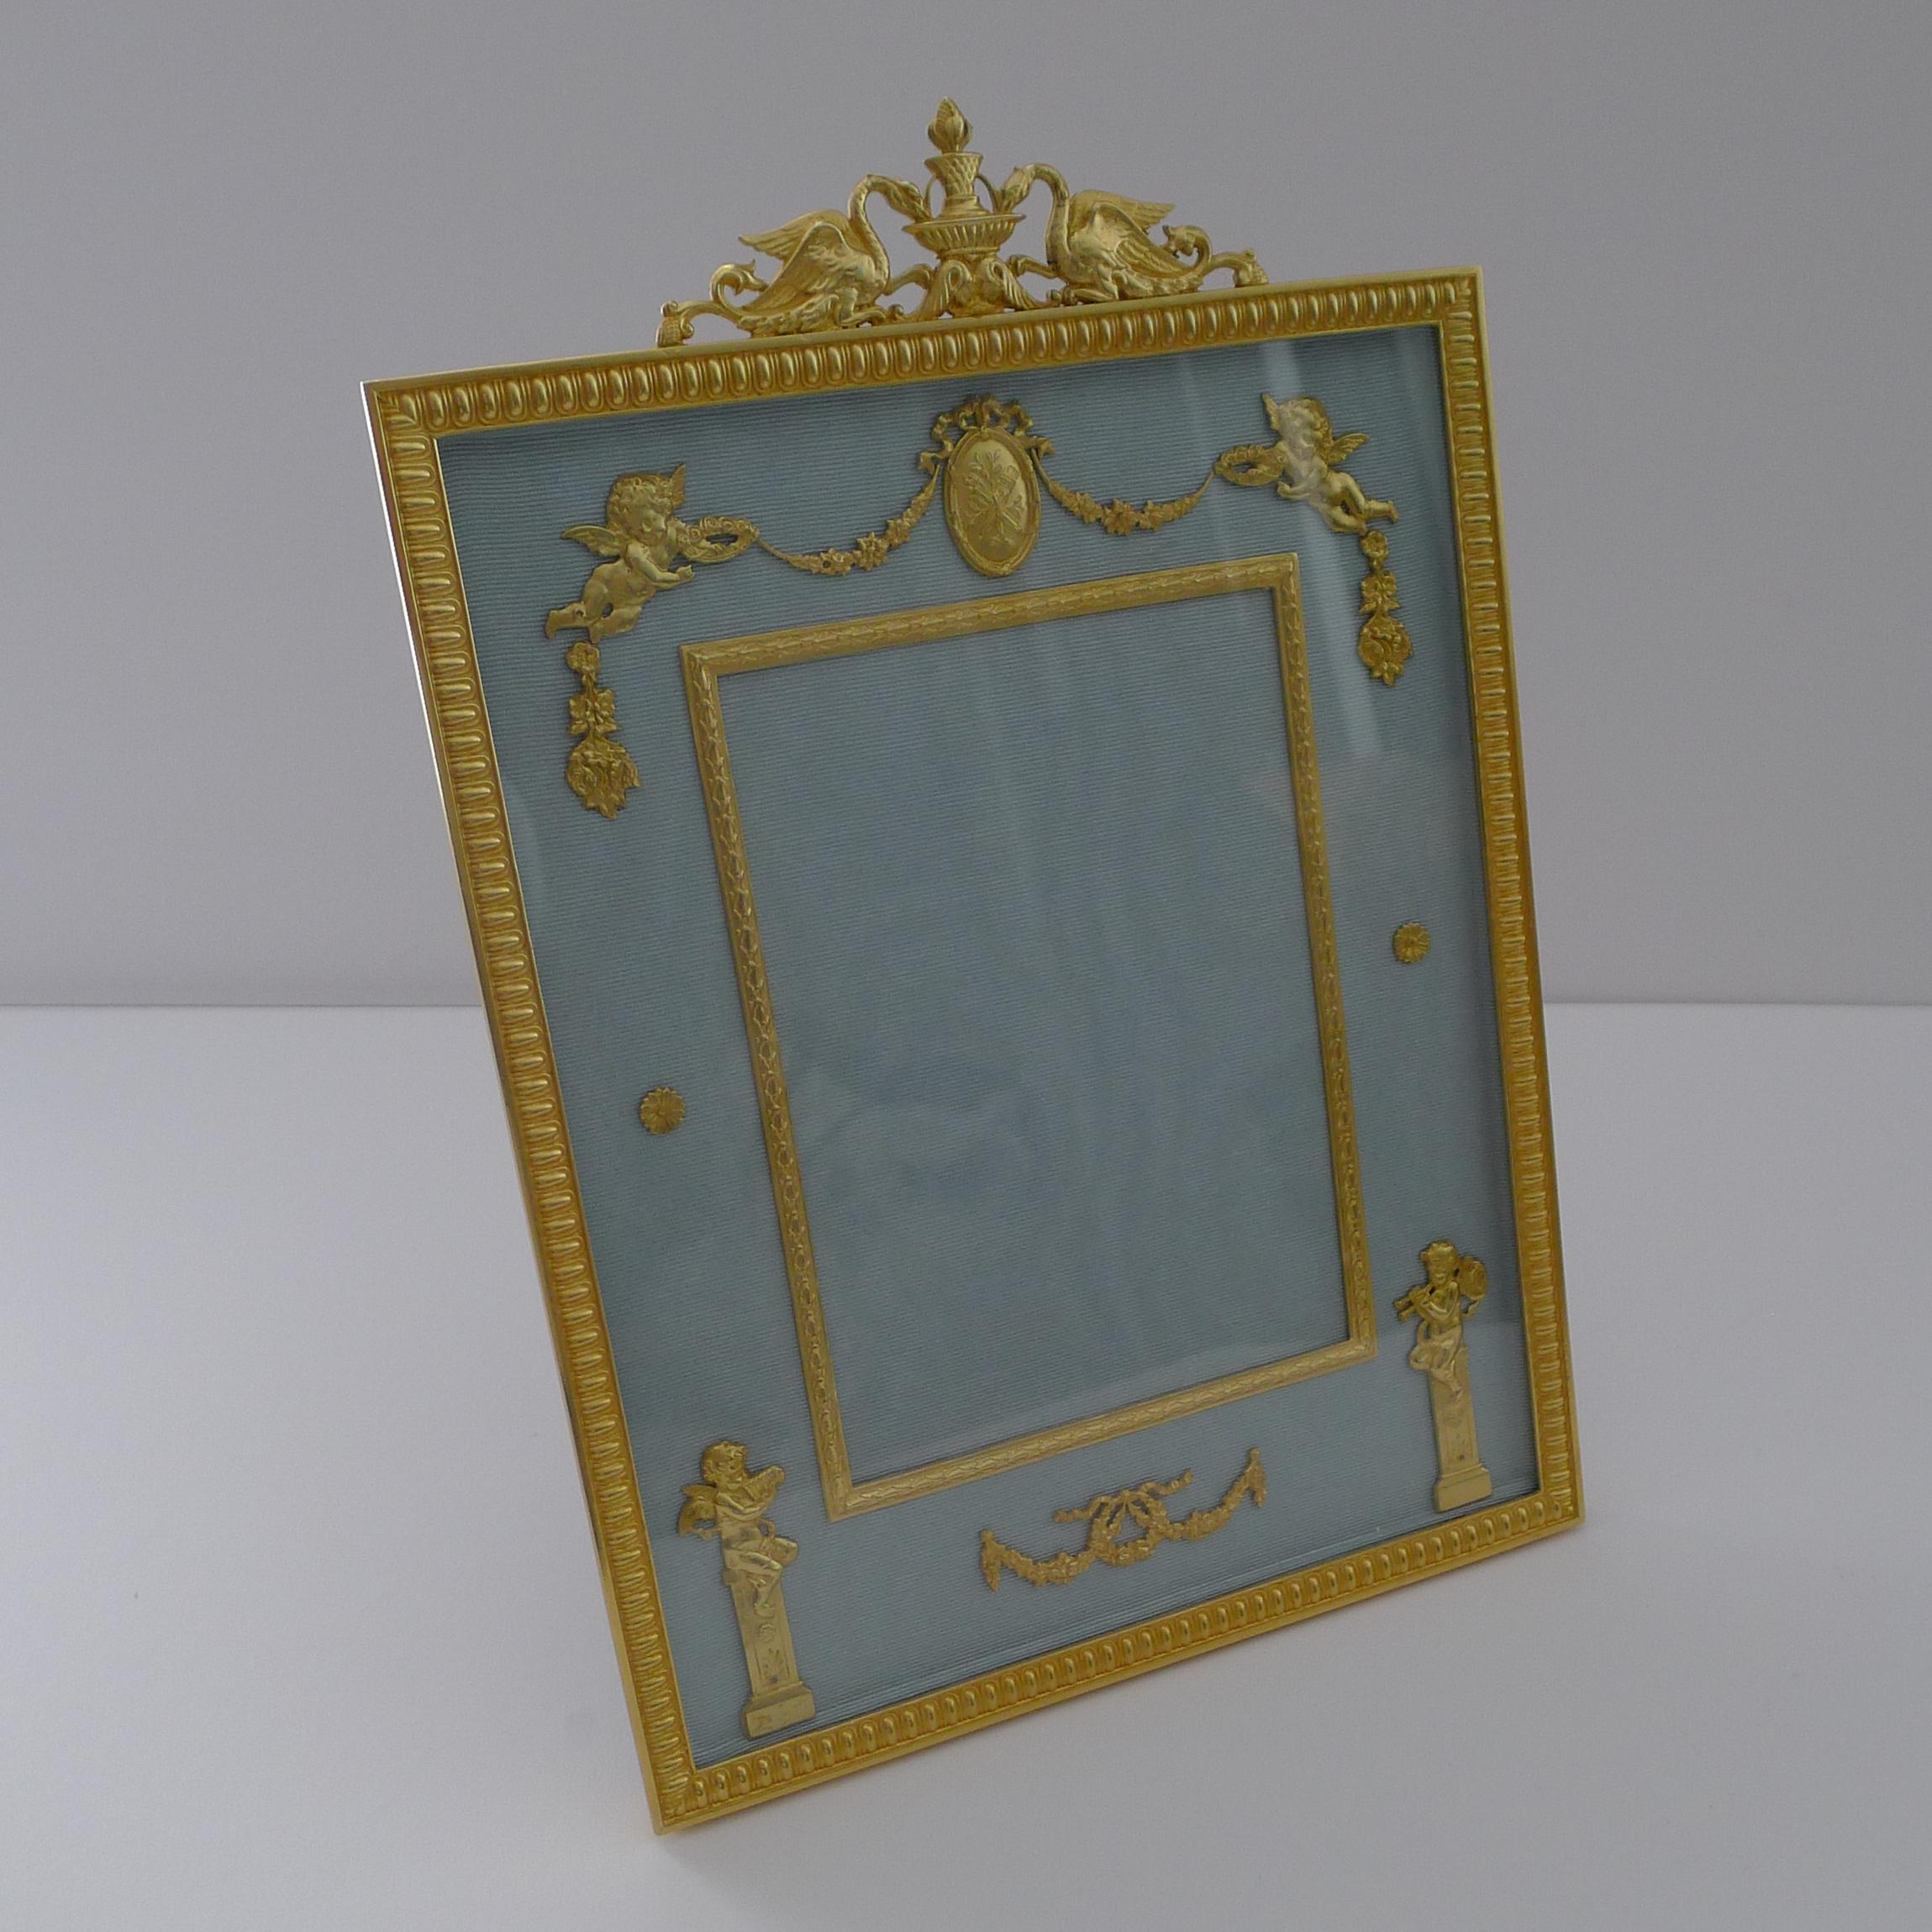 A magnificent French picture frame made from bronze and smothered in gold, beautifully restored to it's former glory and ready to adorn the finest of homes for another 100 years.

The top is crowned with a pair of Swans drinking from a fountain and